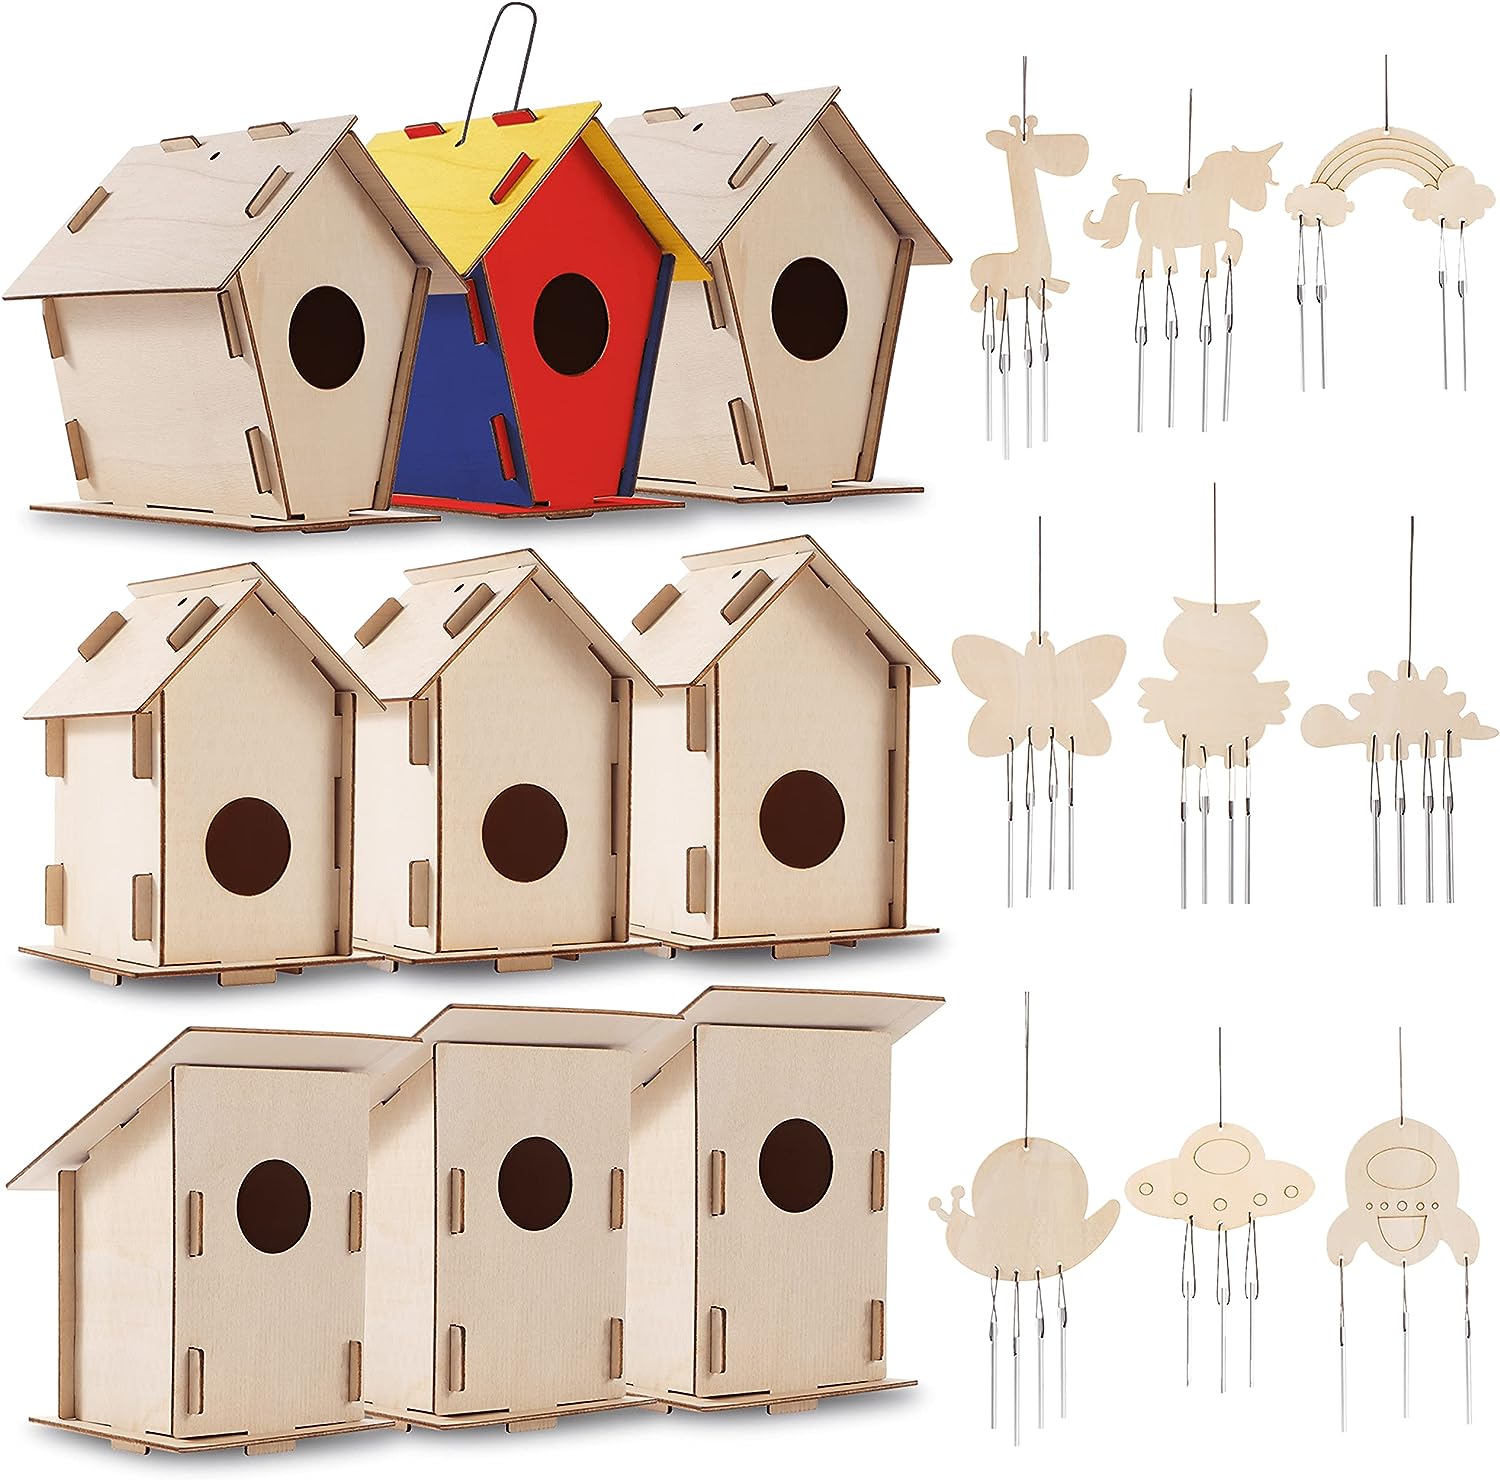 9 Wooden Birdhouses & 9 Wind Chimes -Art & Crafts for [...]